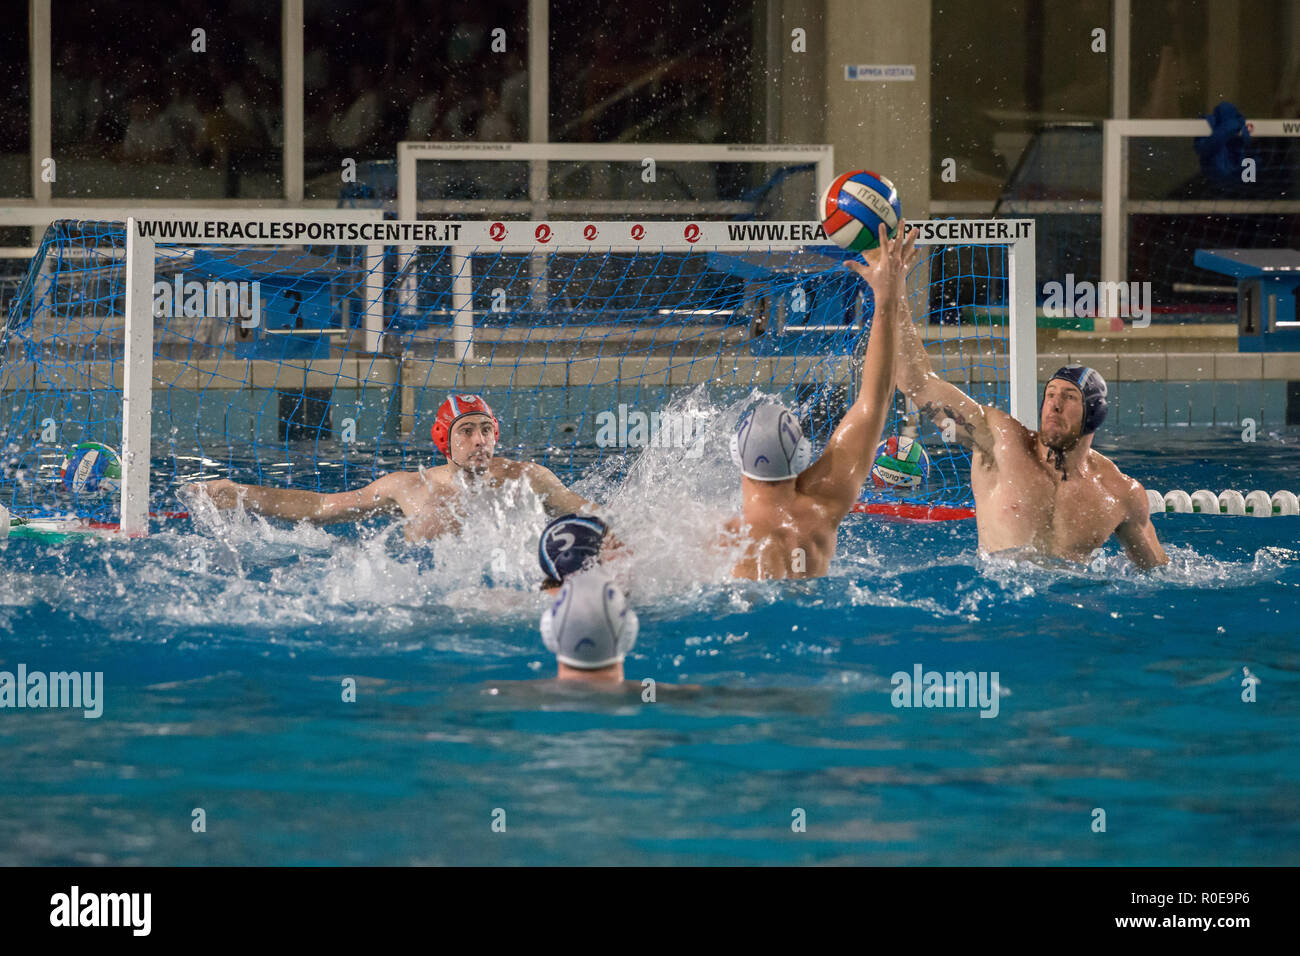 Five players during attack actions - A series of shots depicting water polo players,.Game actions, attack, defense and goal. Stock Photo